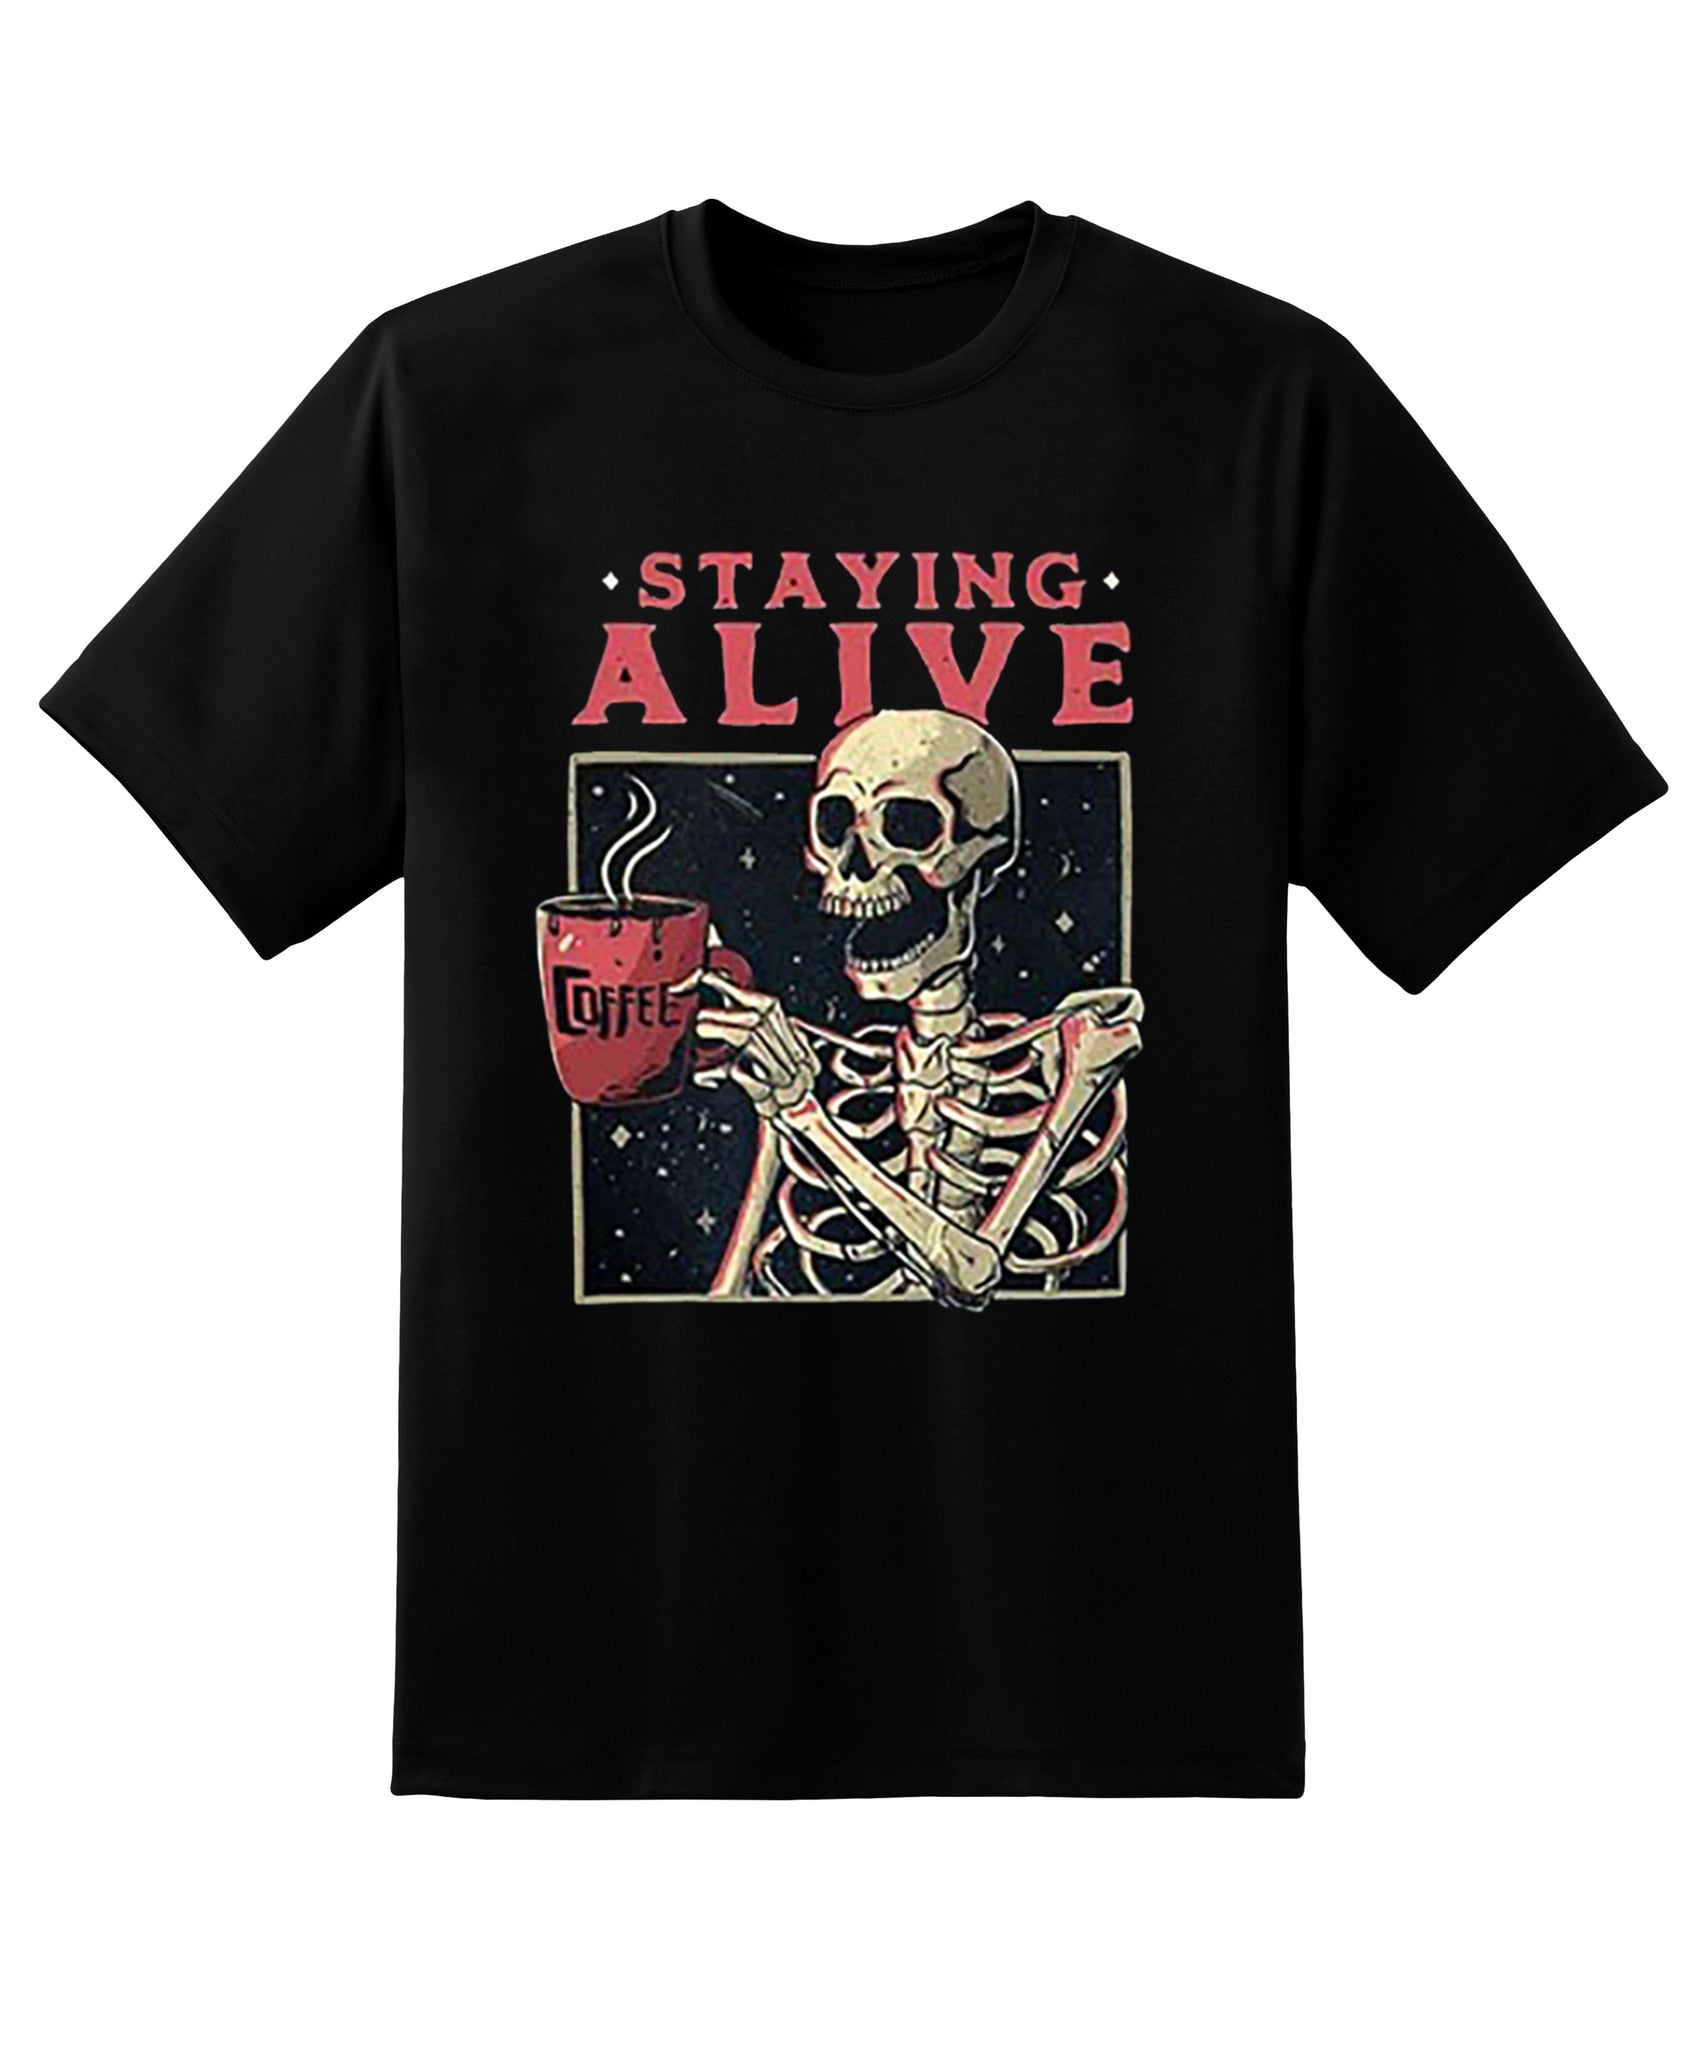 Skitongift Staying Alive Coffee T-Shirt,Halloween Vintage T-Shirt For Women Stay Oversized Crewneck,Trendy T-Shirt,Funny Skeleton T-Shirt